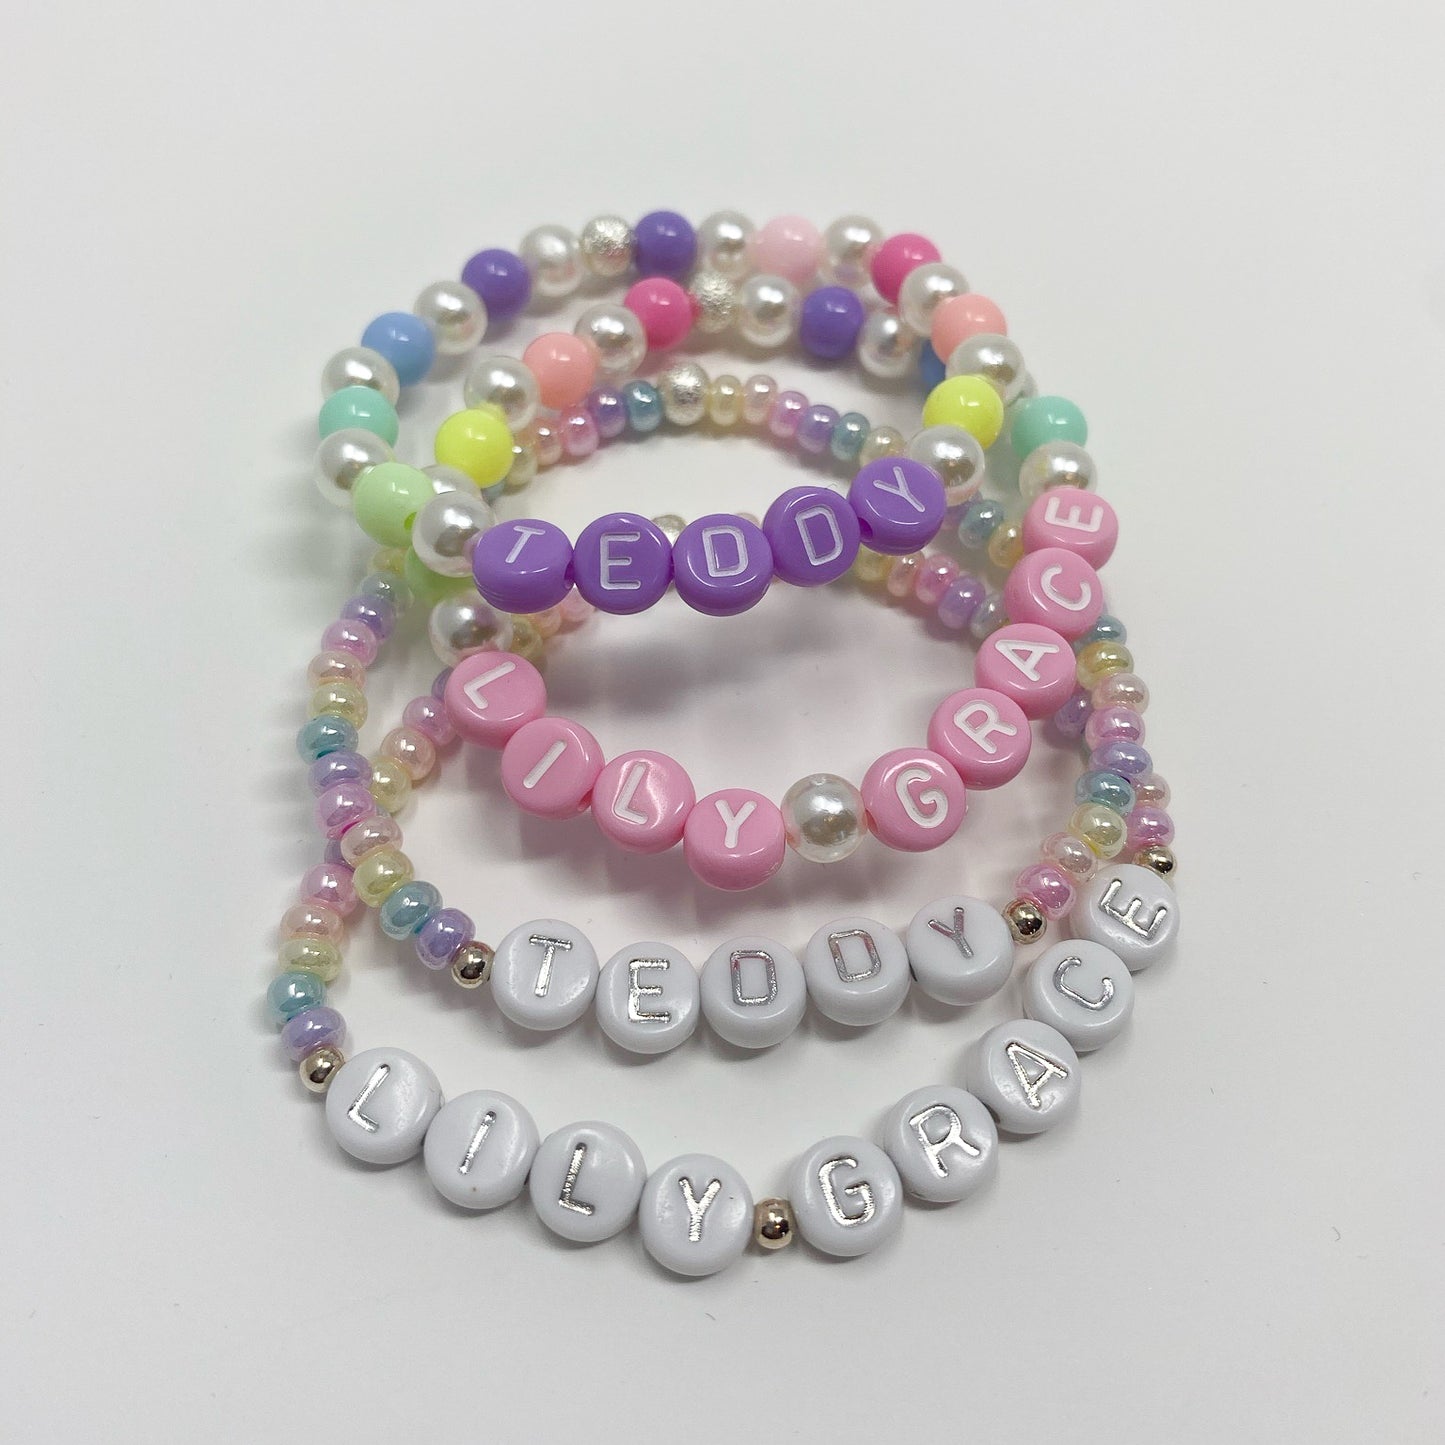 CUSTOM PASTEL RAINBOW BRACELET WITH GOLD OR SILVER TEXT